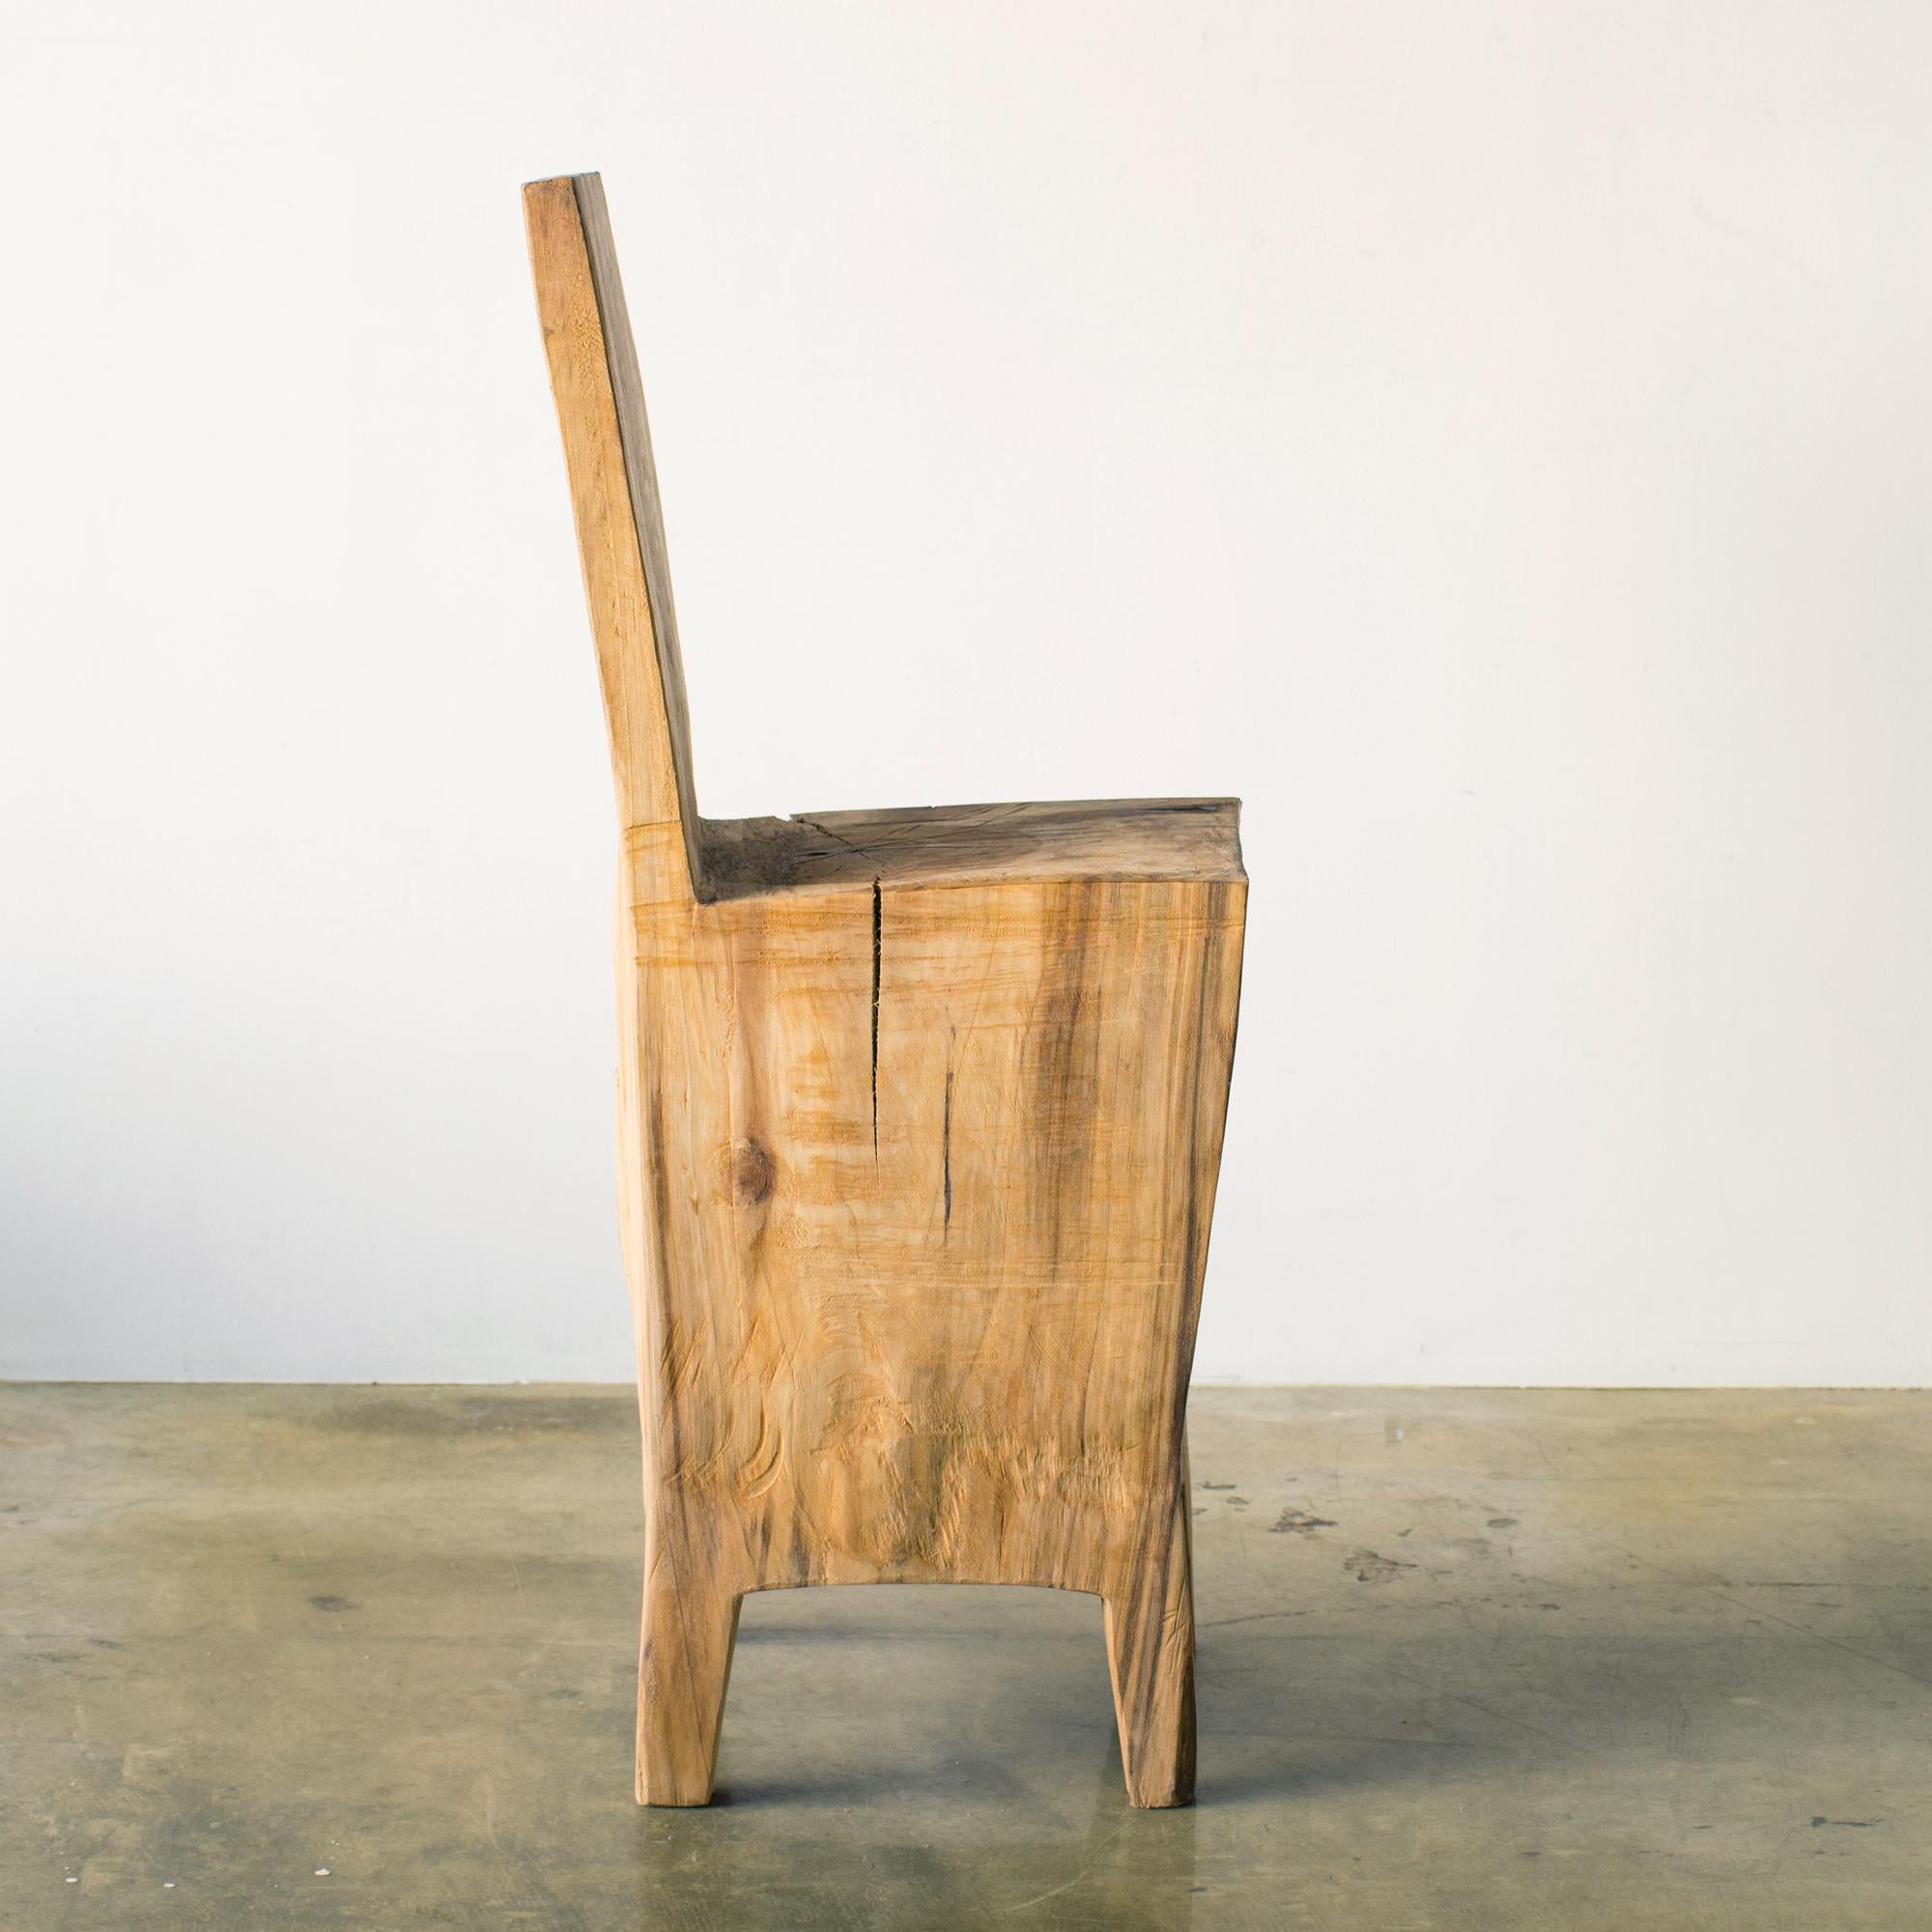 Hand-Carved Hiroyuki Nishimura Sculptural Chair Abstract tribal style wild nature glamping For Sale